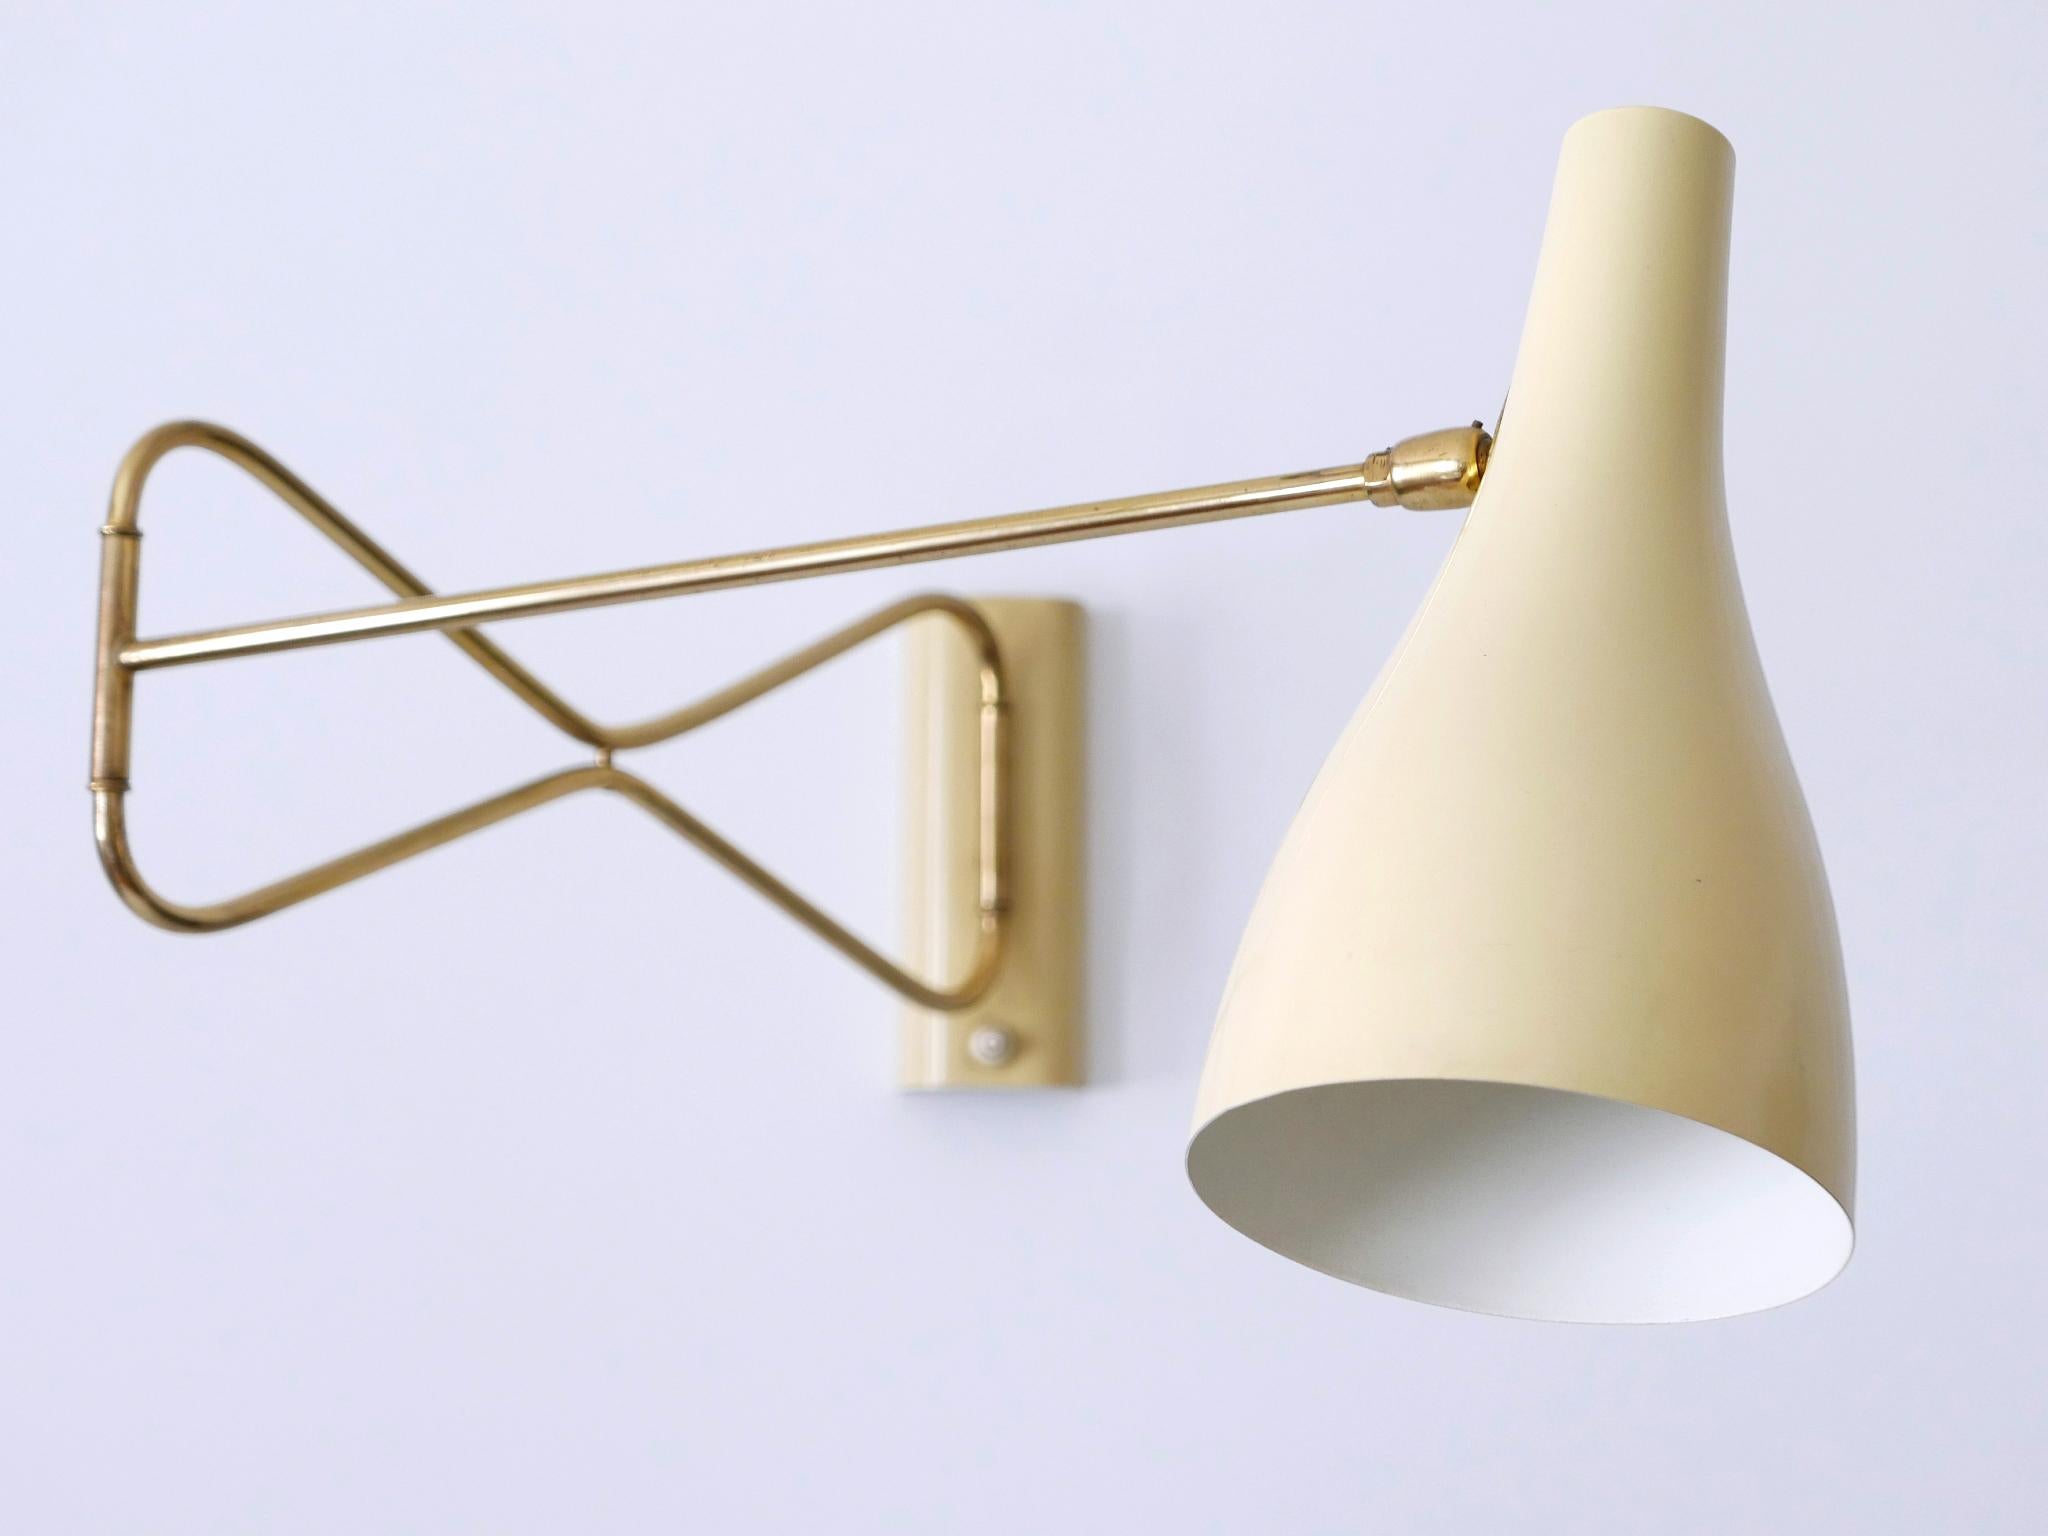 Rare & Elegant Mid Century Modern Wall Lamp '9590/28' by Cosack Germany 1950s For Sale 1